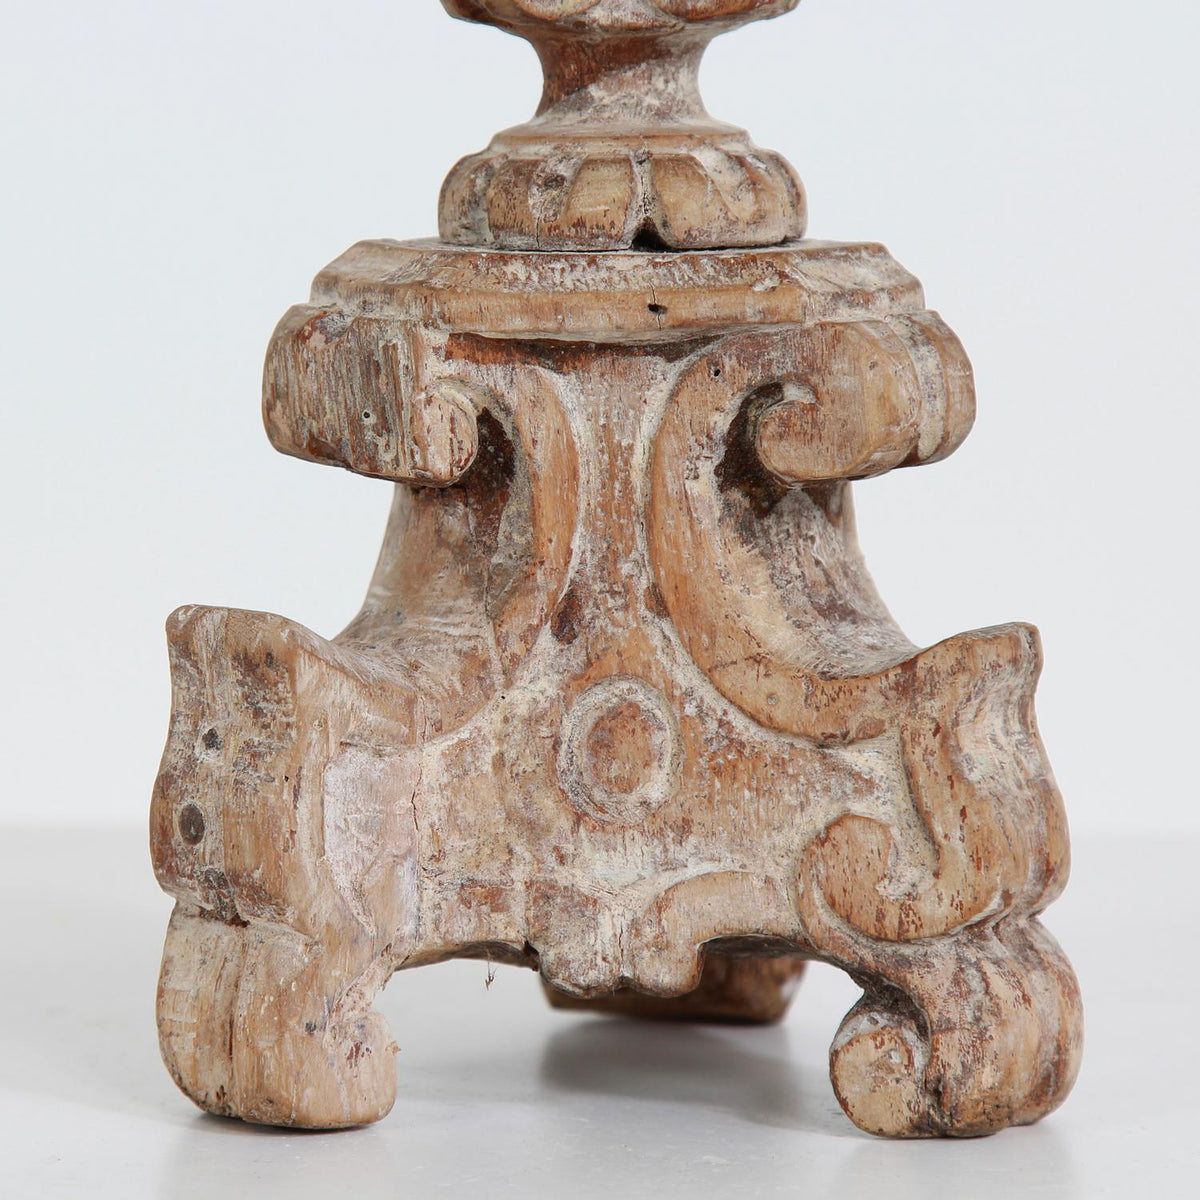 Petite Hand Carved Italian 18thC Weathered Lime Wood Pricket Candlestick